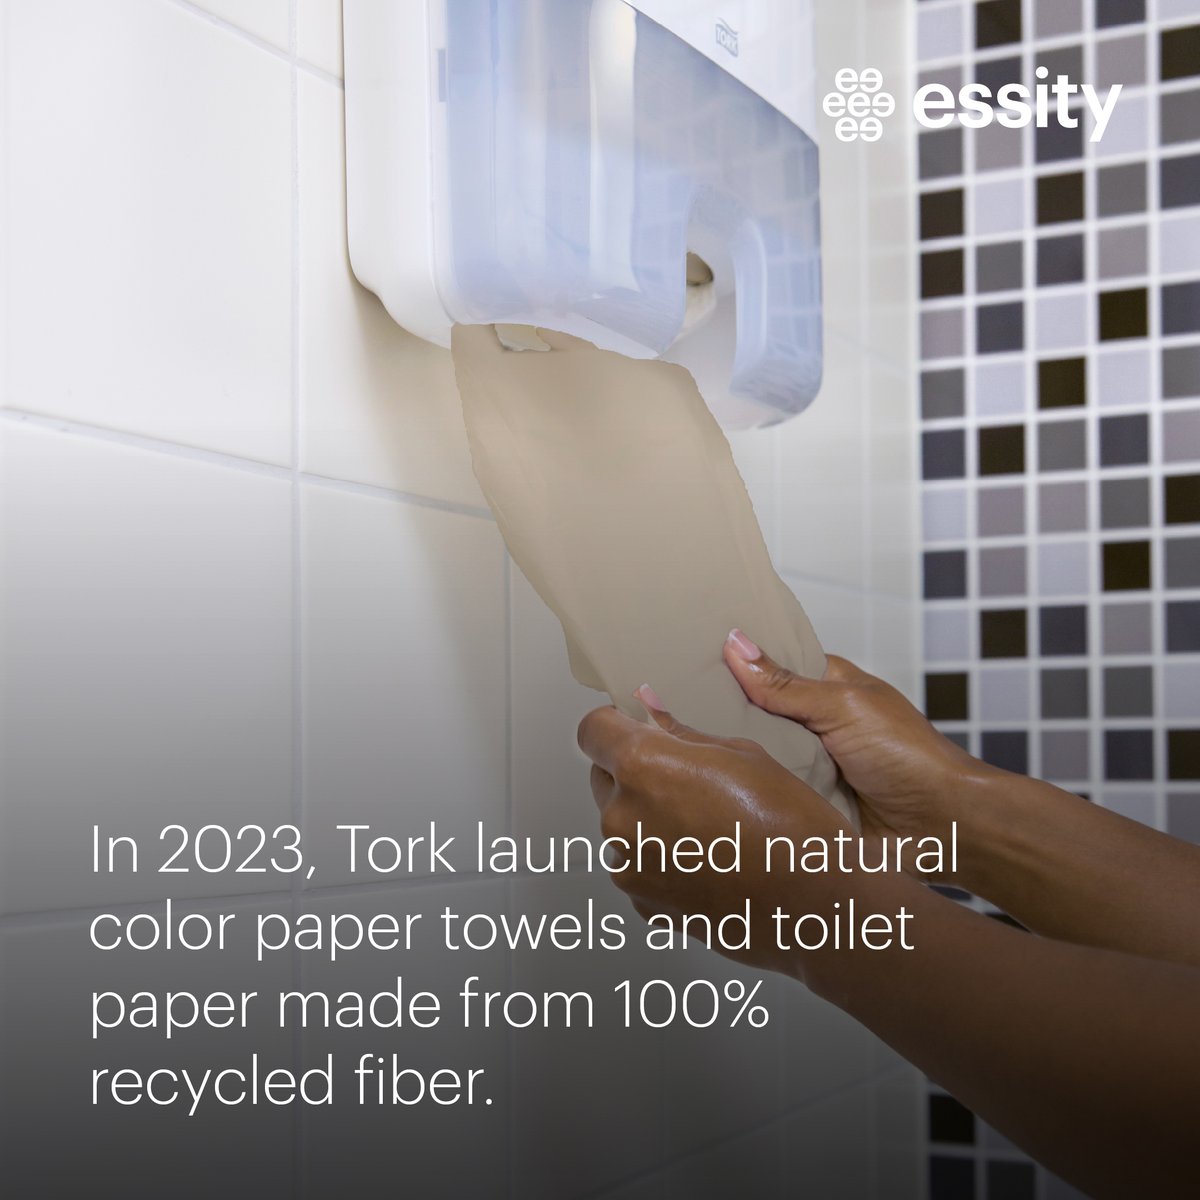 At Essity, we’re committed to enhancing social and environmental well-being. Our brand, Tork, leads the way in innovation that benefits the well-being of people and the planet. Learn about Tork’s 2023 innovations and our #sustainability commitment:: bit.ly/3PsPeSC